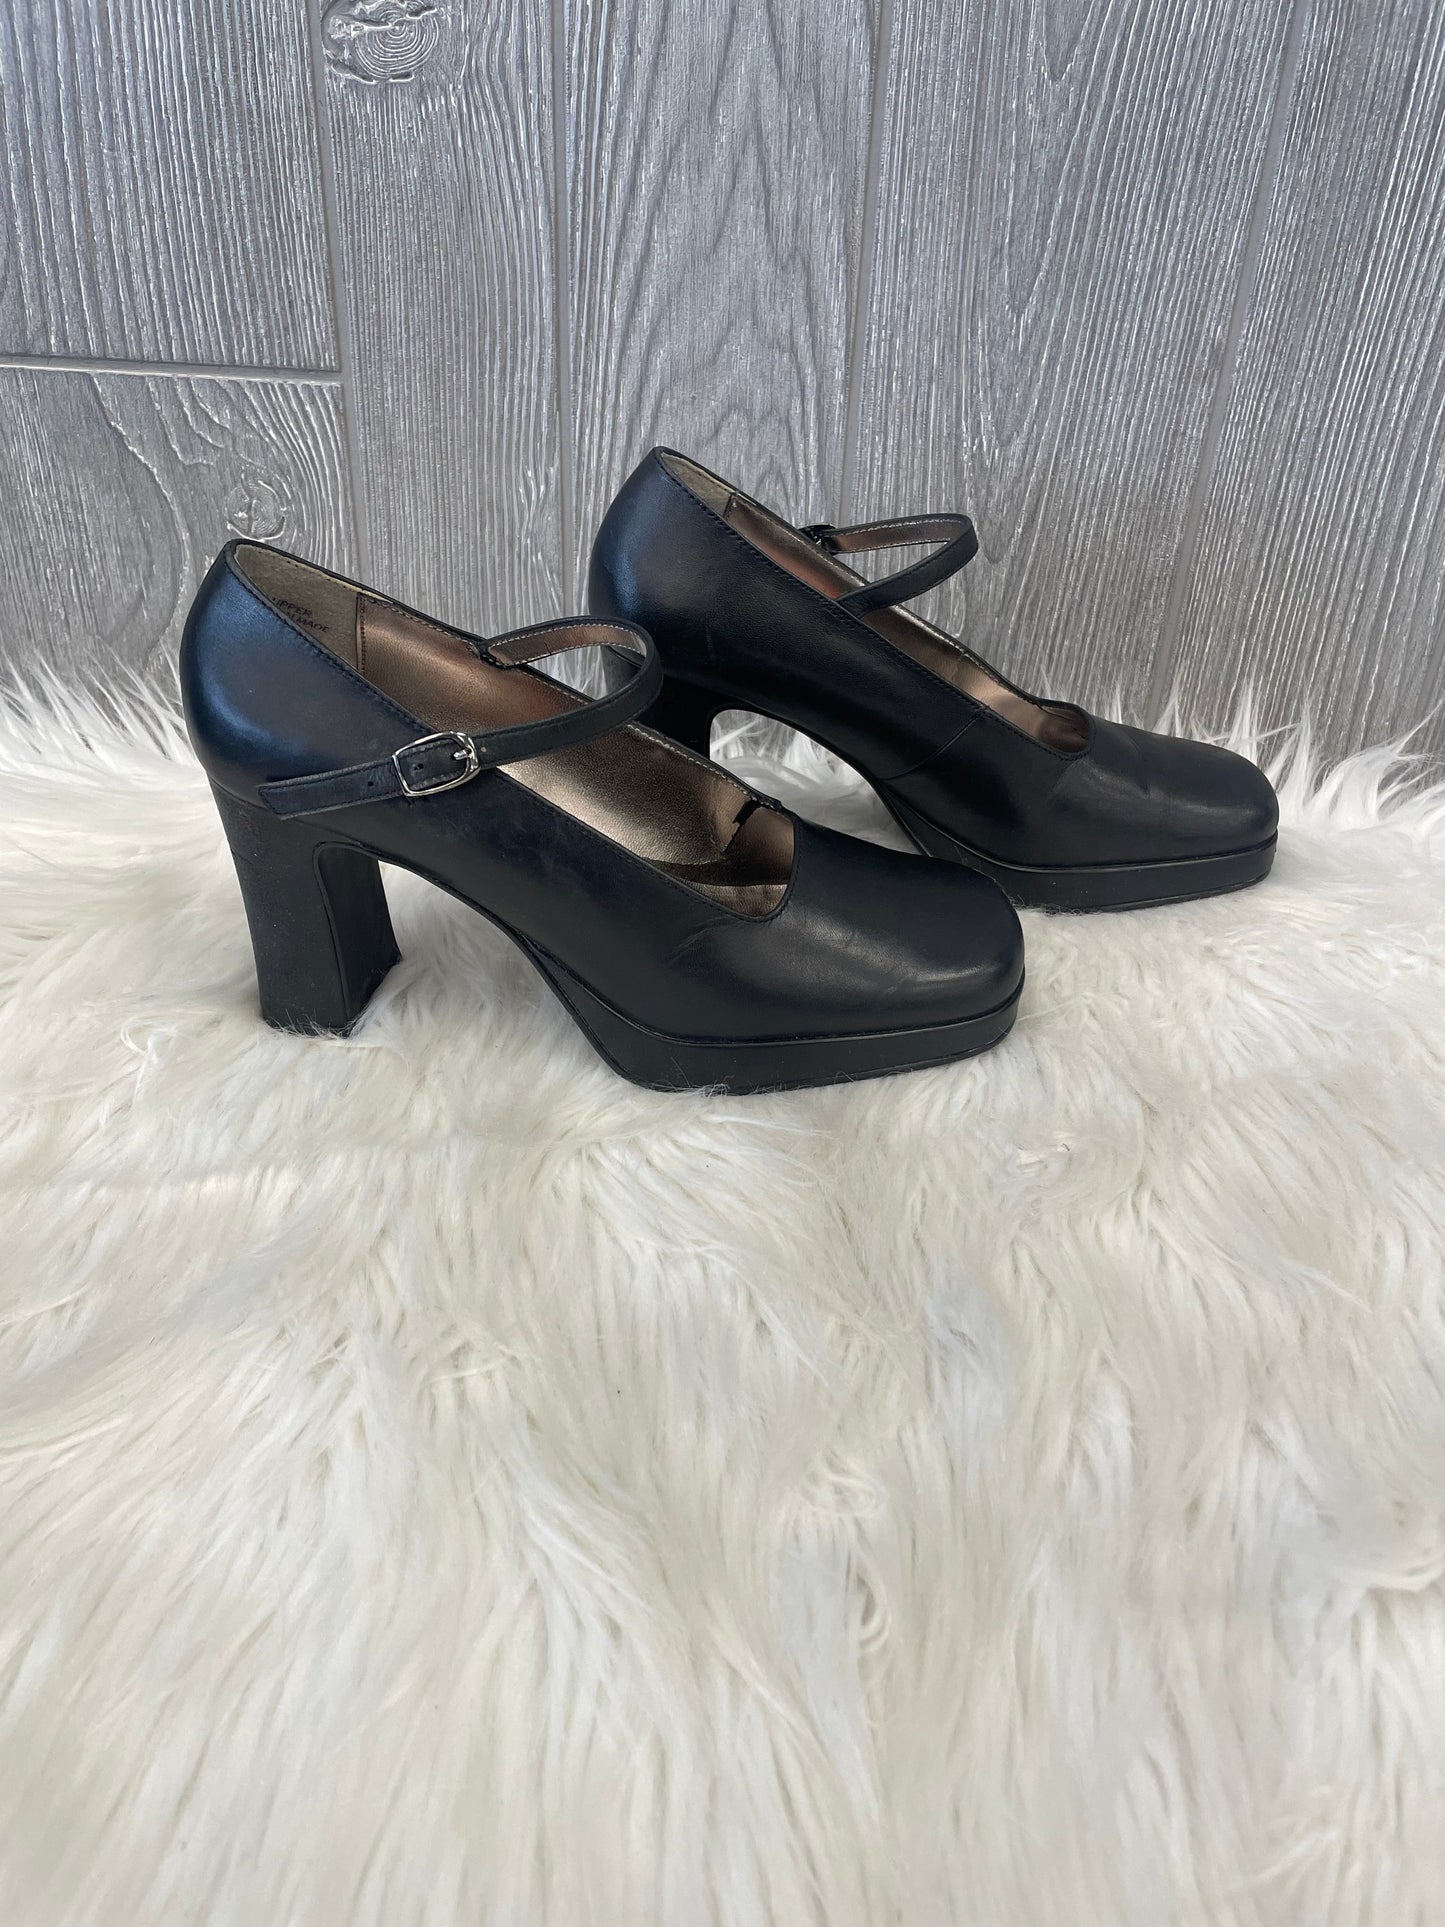 Black Shoes Heels Block Unlisted, Size 6